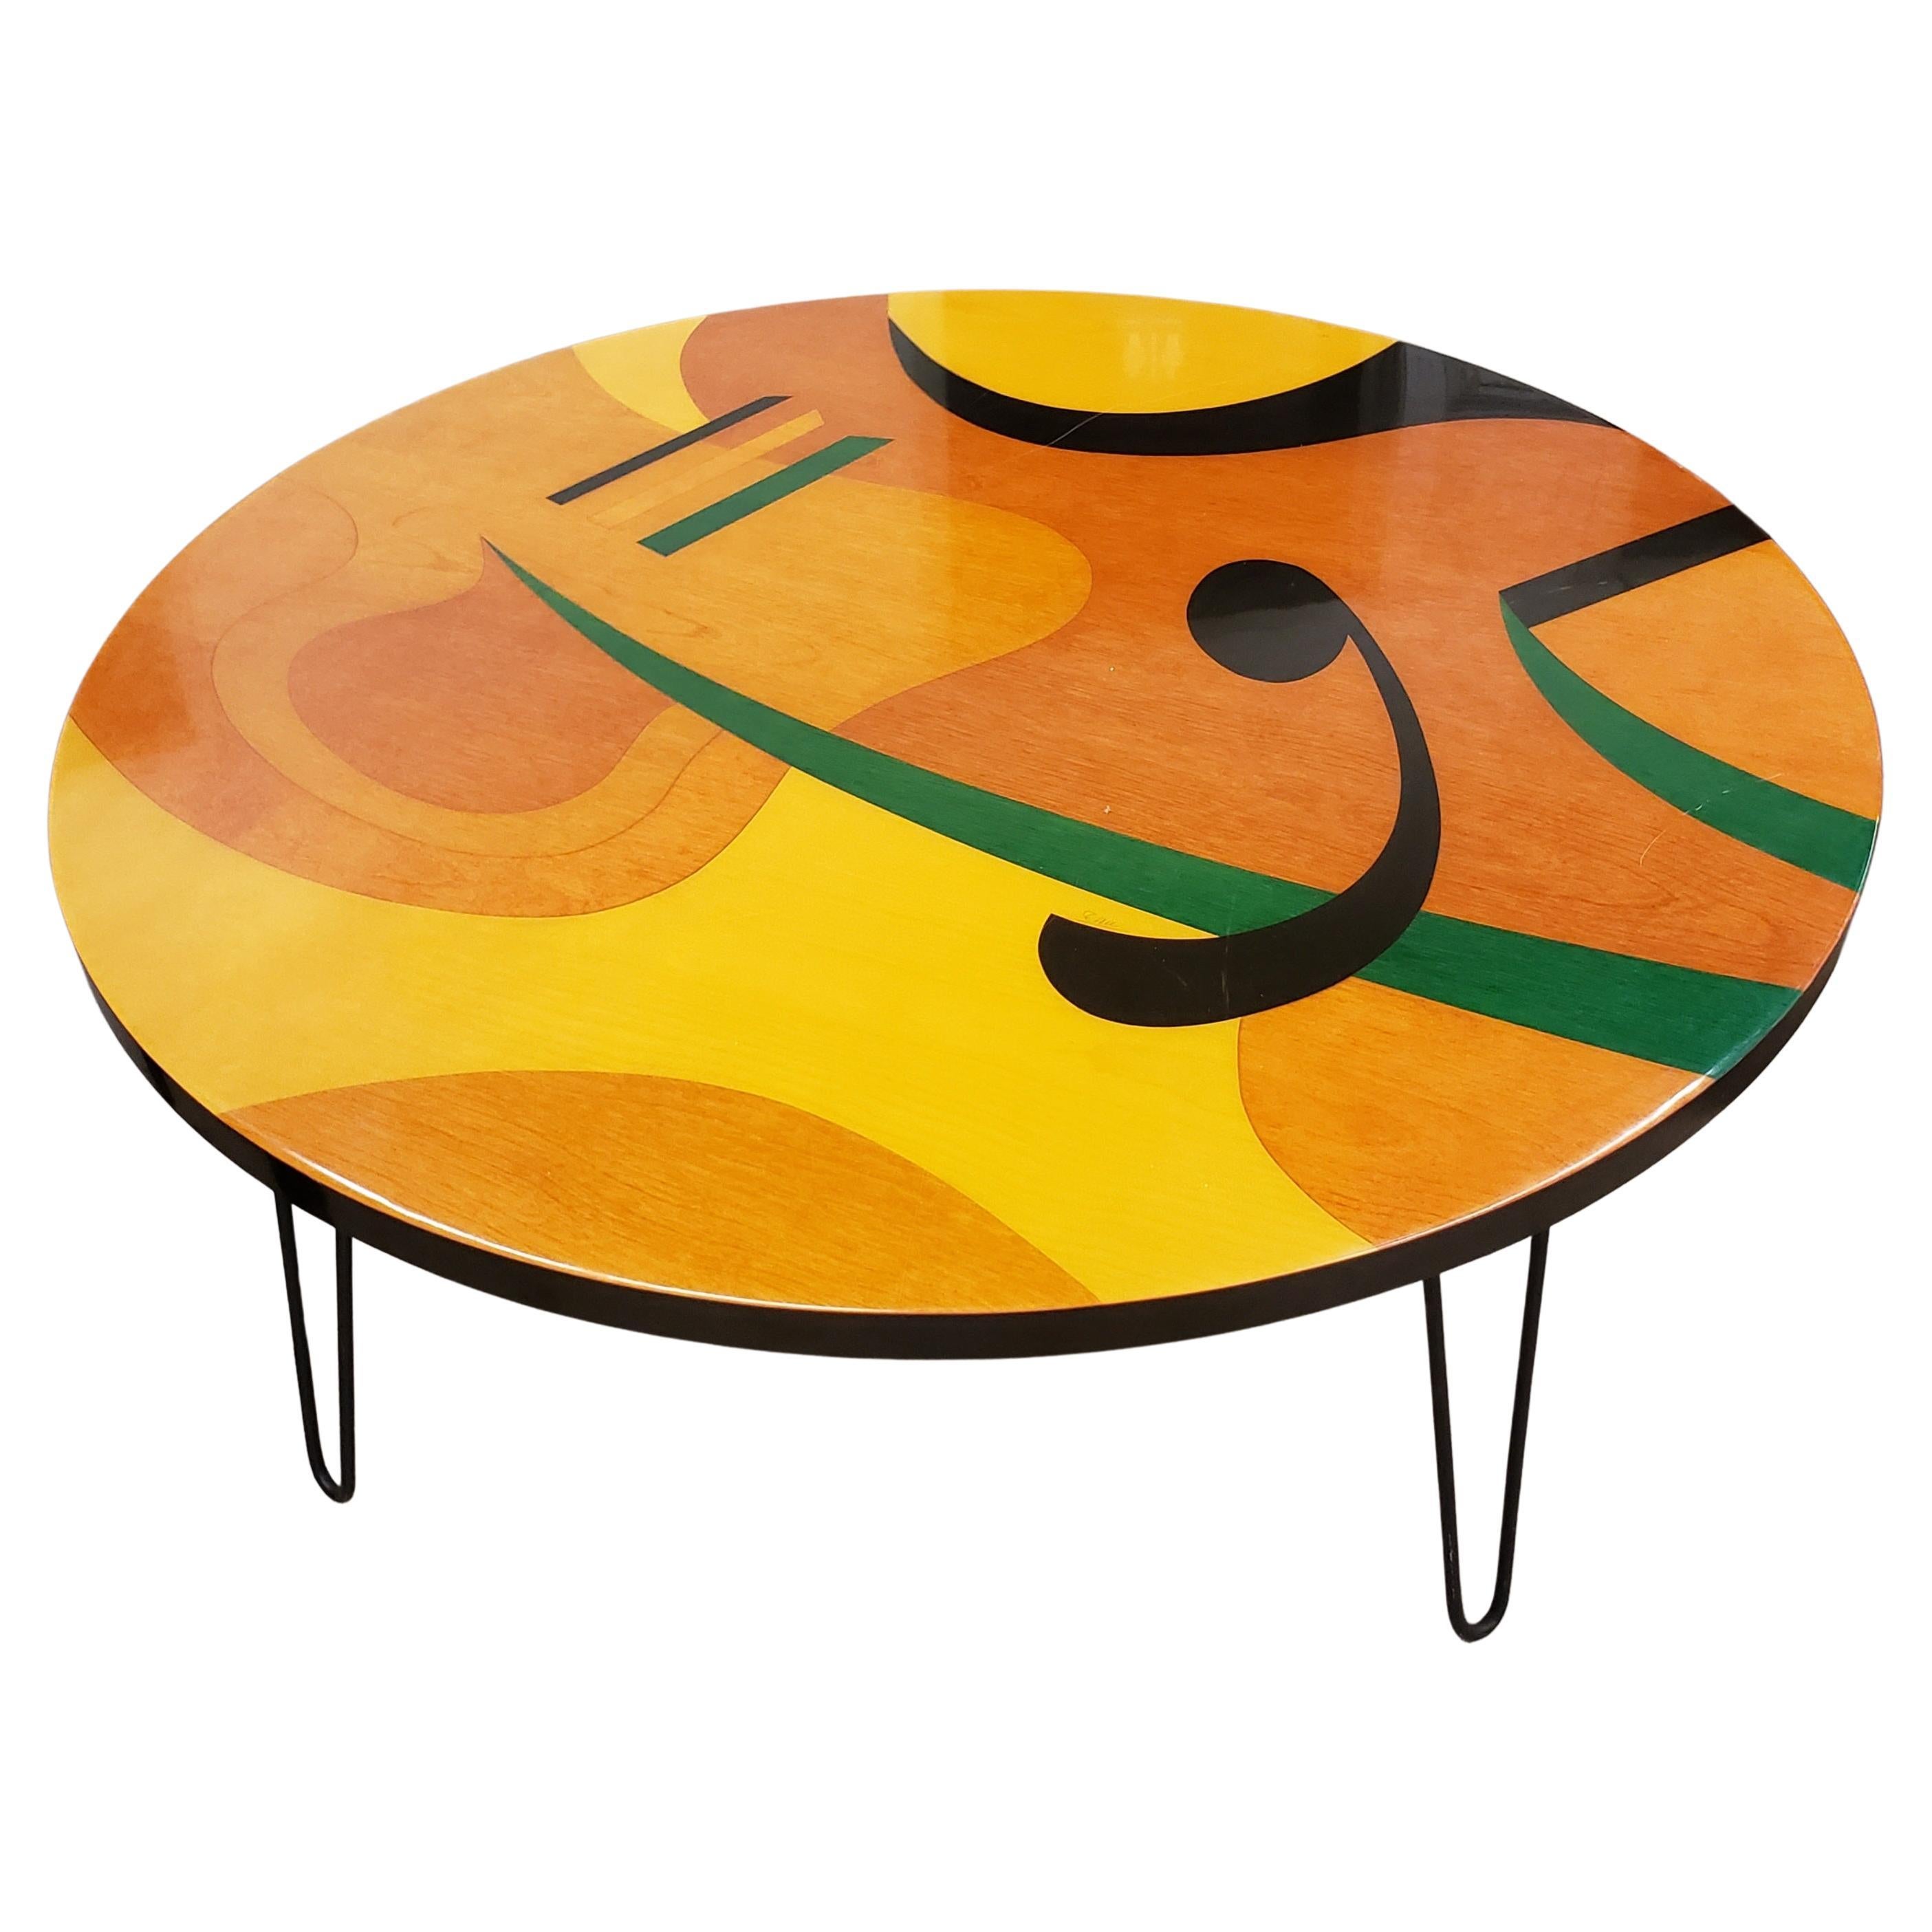 Benjamin Le, "Lively" Abstract Mid-Century Modern Painted Coffee Table For Sale